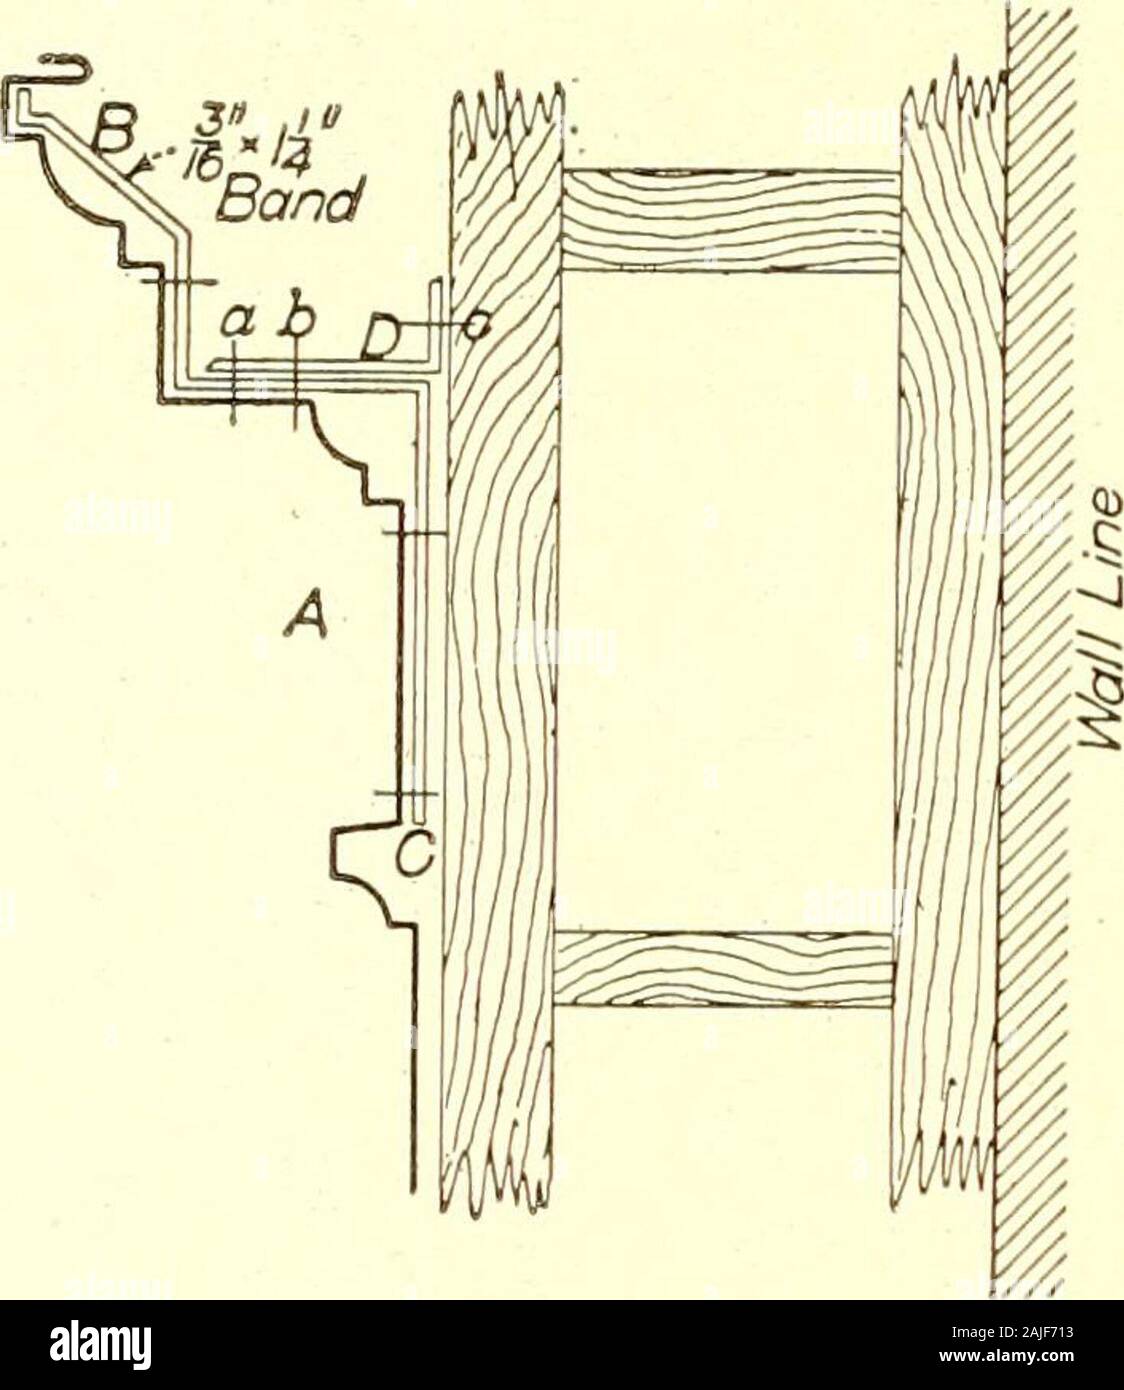 Home instruction for sheet metal workers . n the bay is very large, thecornice at the top requies ironbracing, Fig. 510, in which A isthe main cornice, supported byband iron braces B C, which inturn are fastened to the metal cornice by the bolts indicated bythe dash lines, and to which an anchor D is bolted at a b, turnedup at the back and nailed to the framing at c. This method holdsthe cornice and secures it firmly, and inside of this bracing thegutter is framed, Fig. 509. To make a smooth job, the ironbraces should be countersunk on the outside, so that when theY X zAm- stove bolts are in Stock Photo